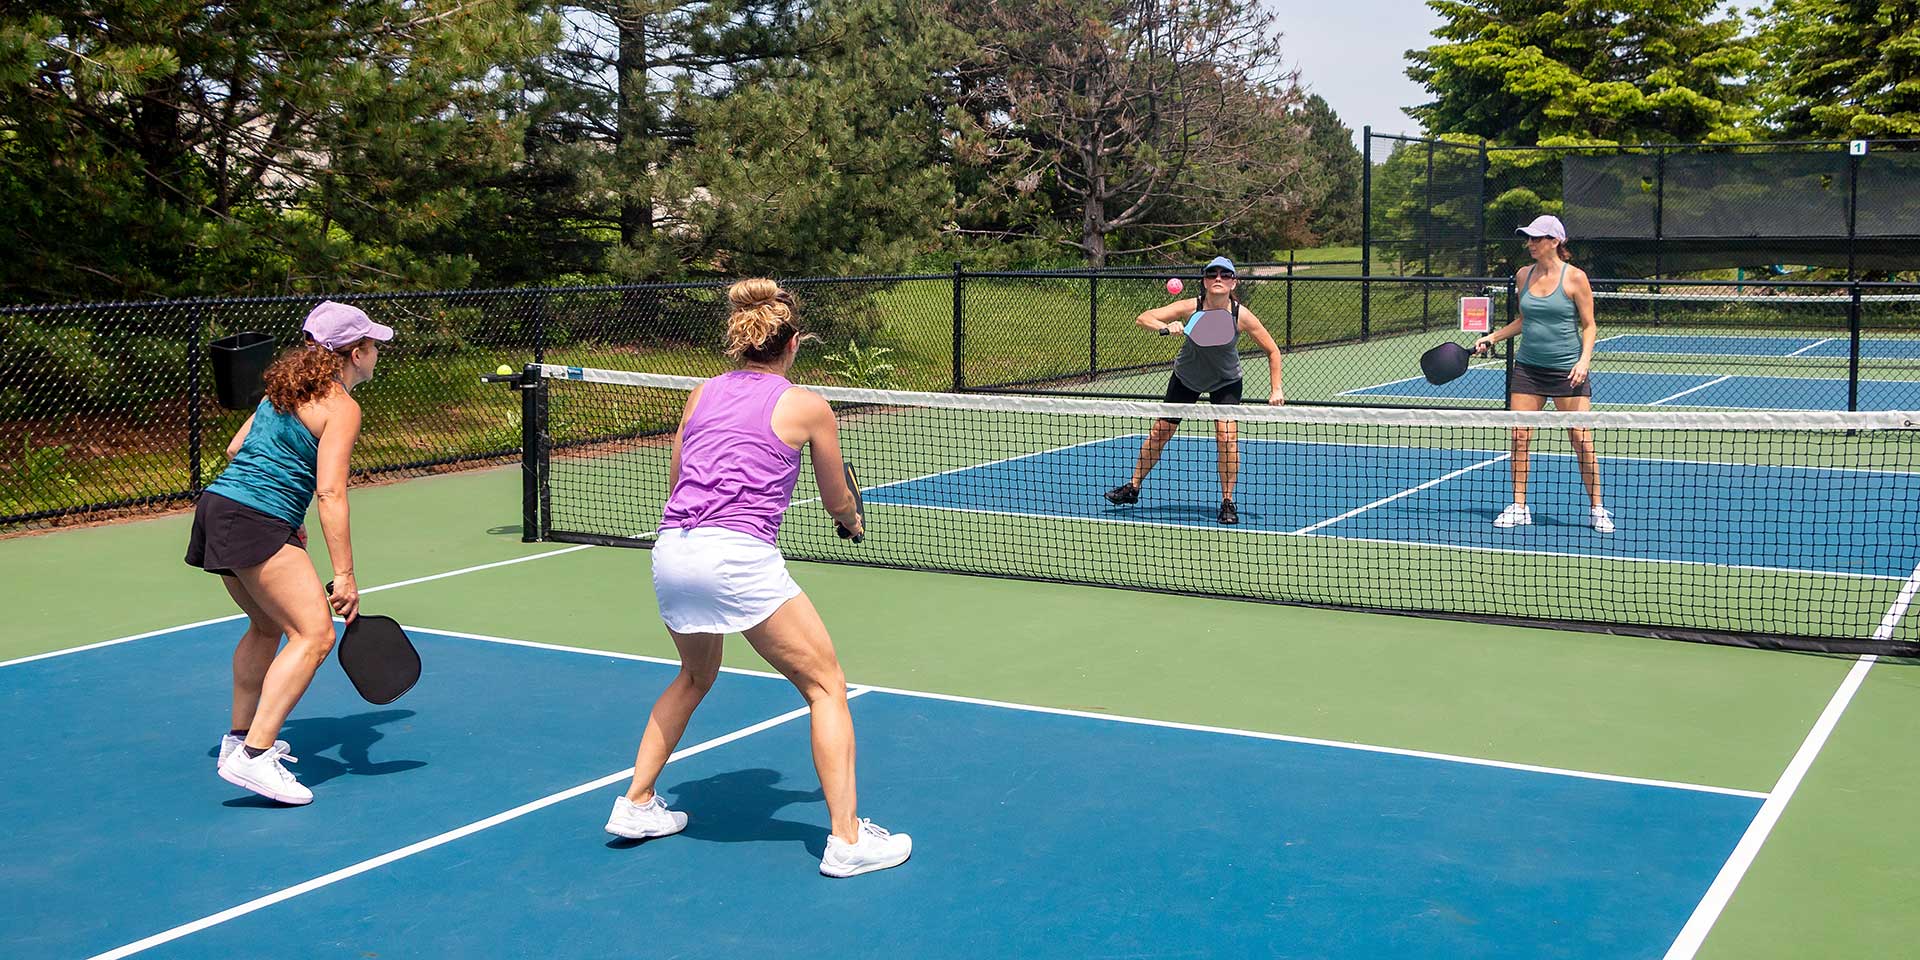 What To Wear for Pickleball